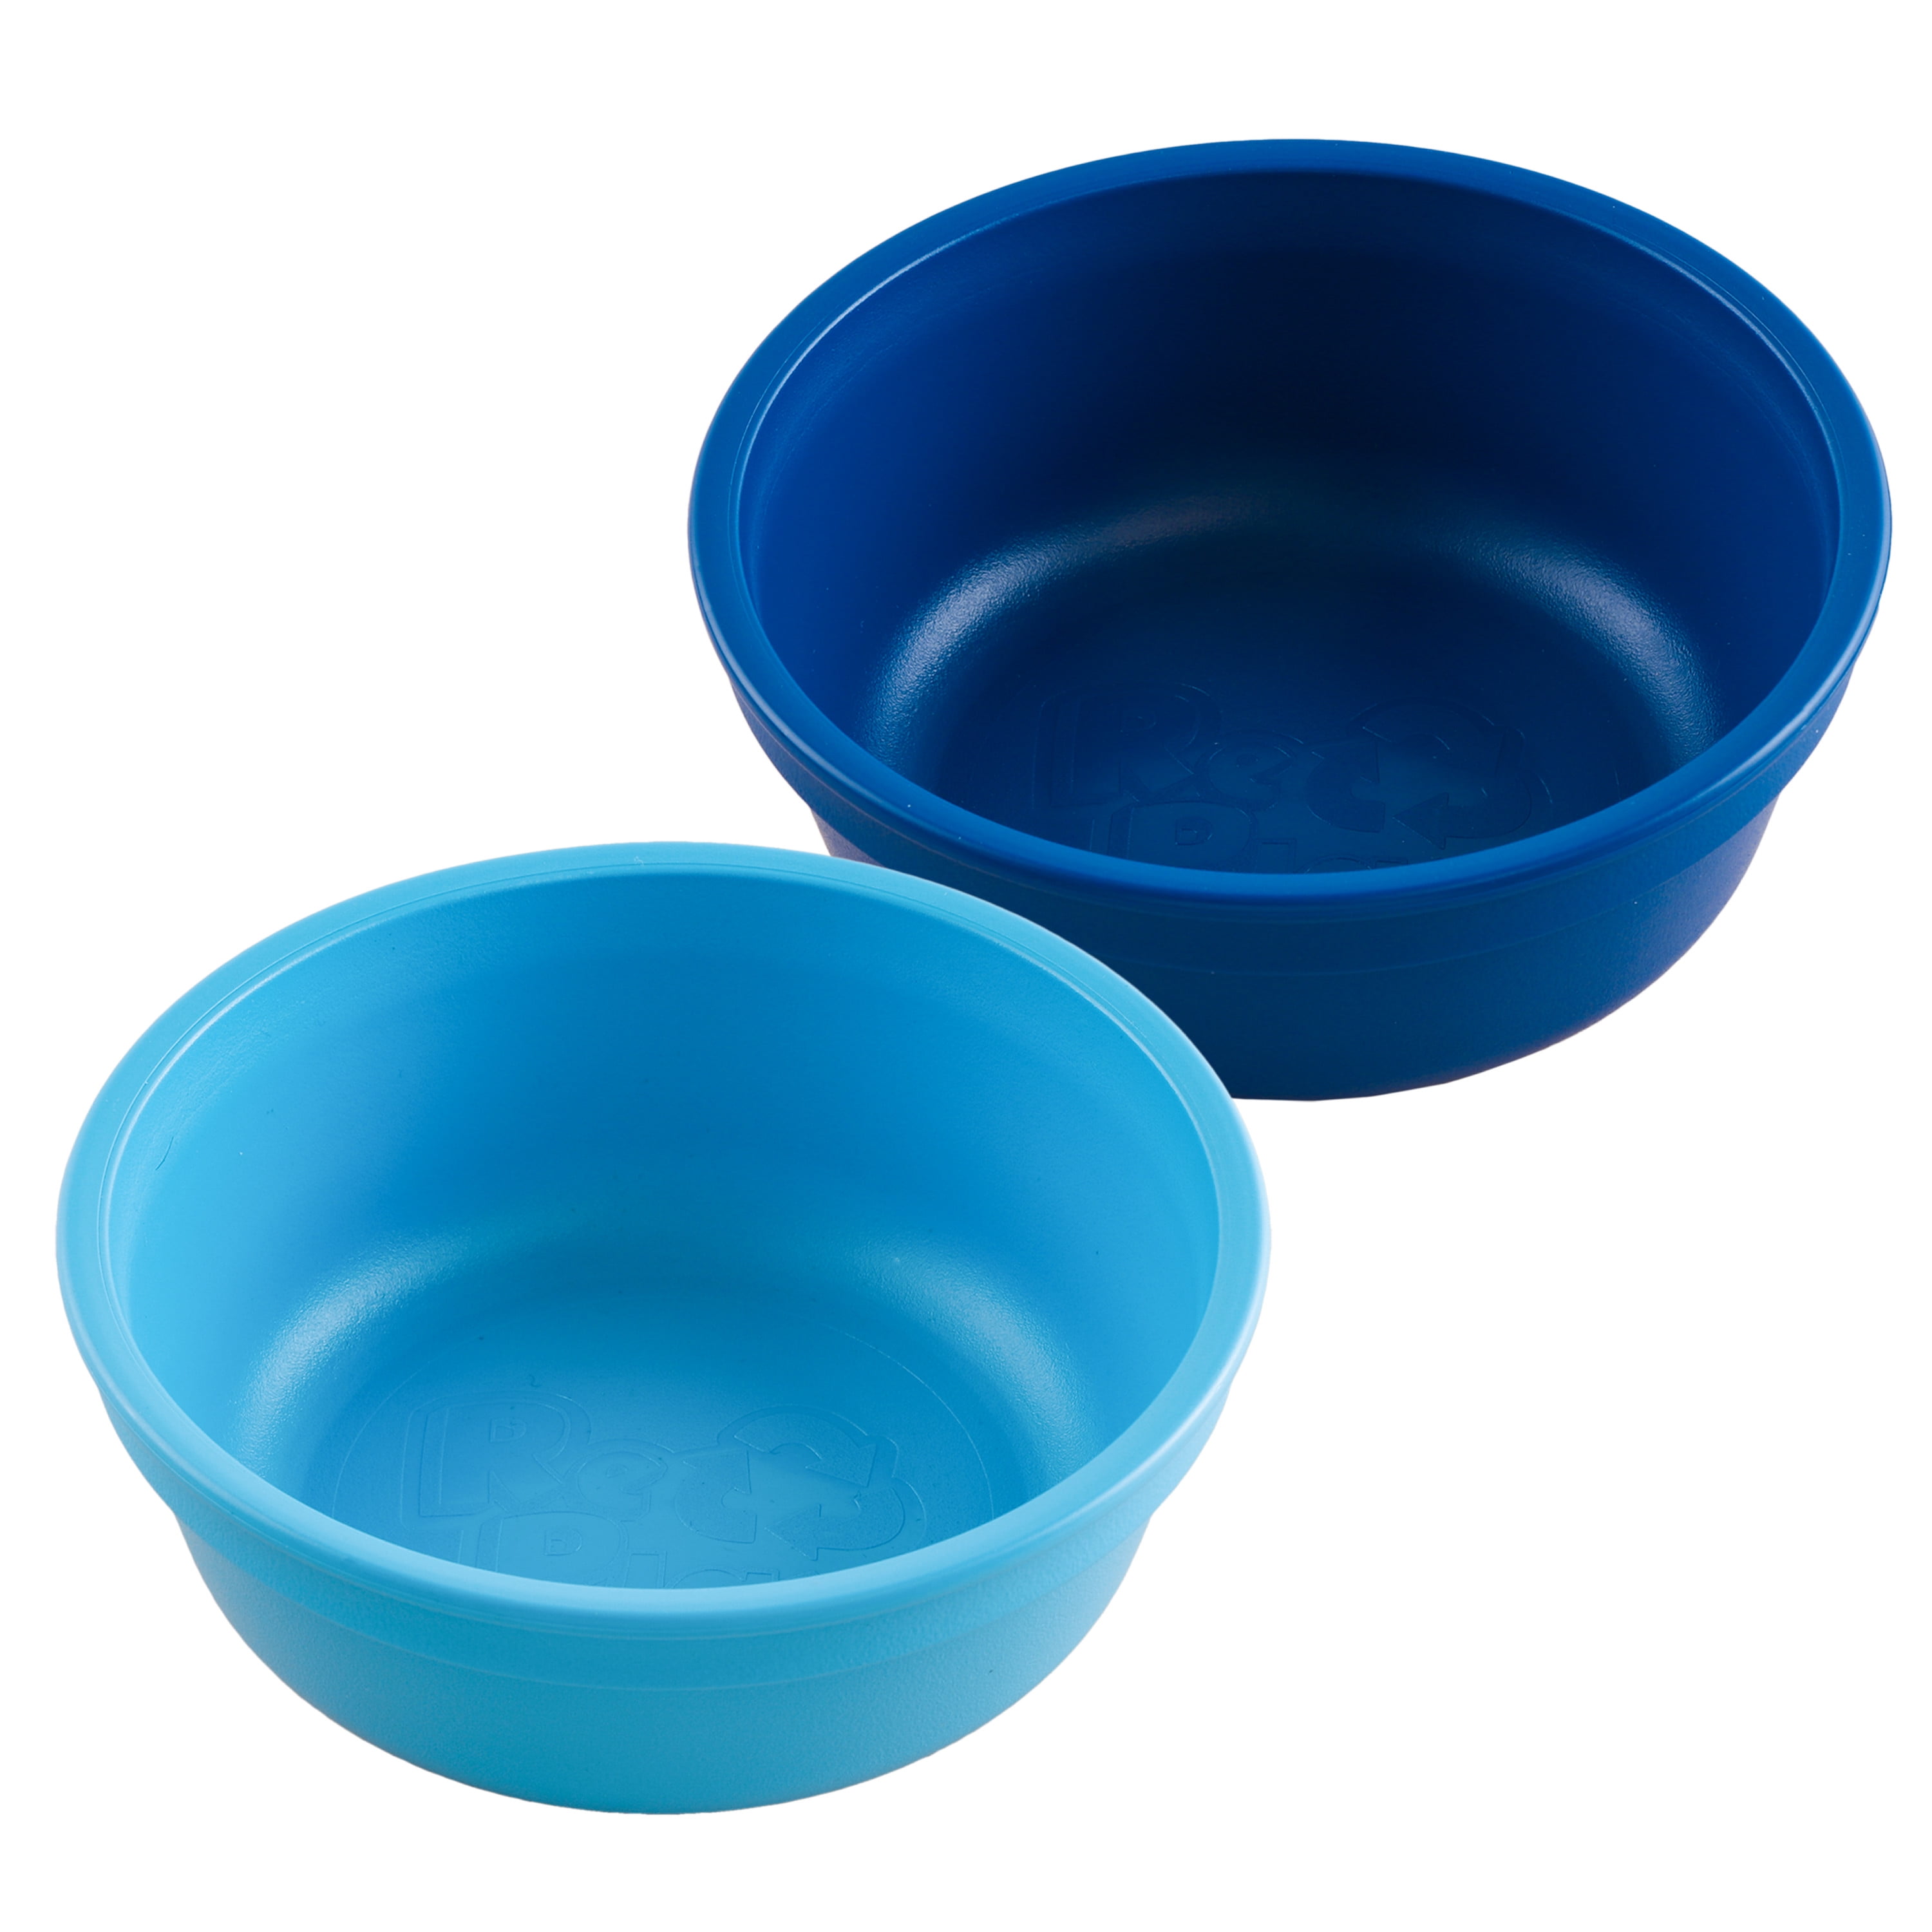 Re Play Made in USA 12 Oz. Reusable Plastic Bowls, Pack of 3 With